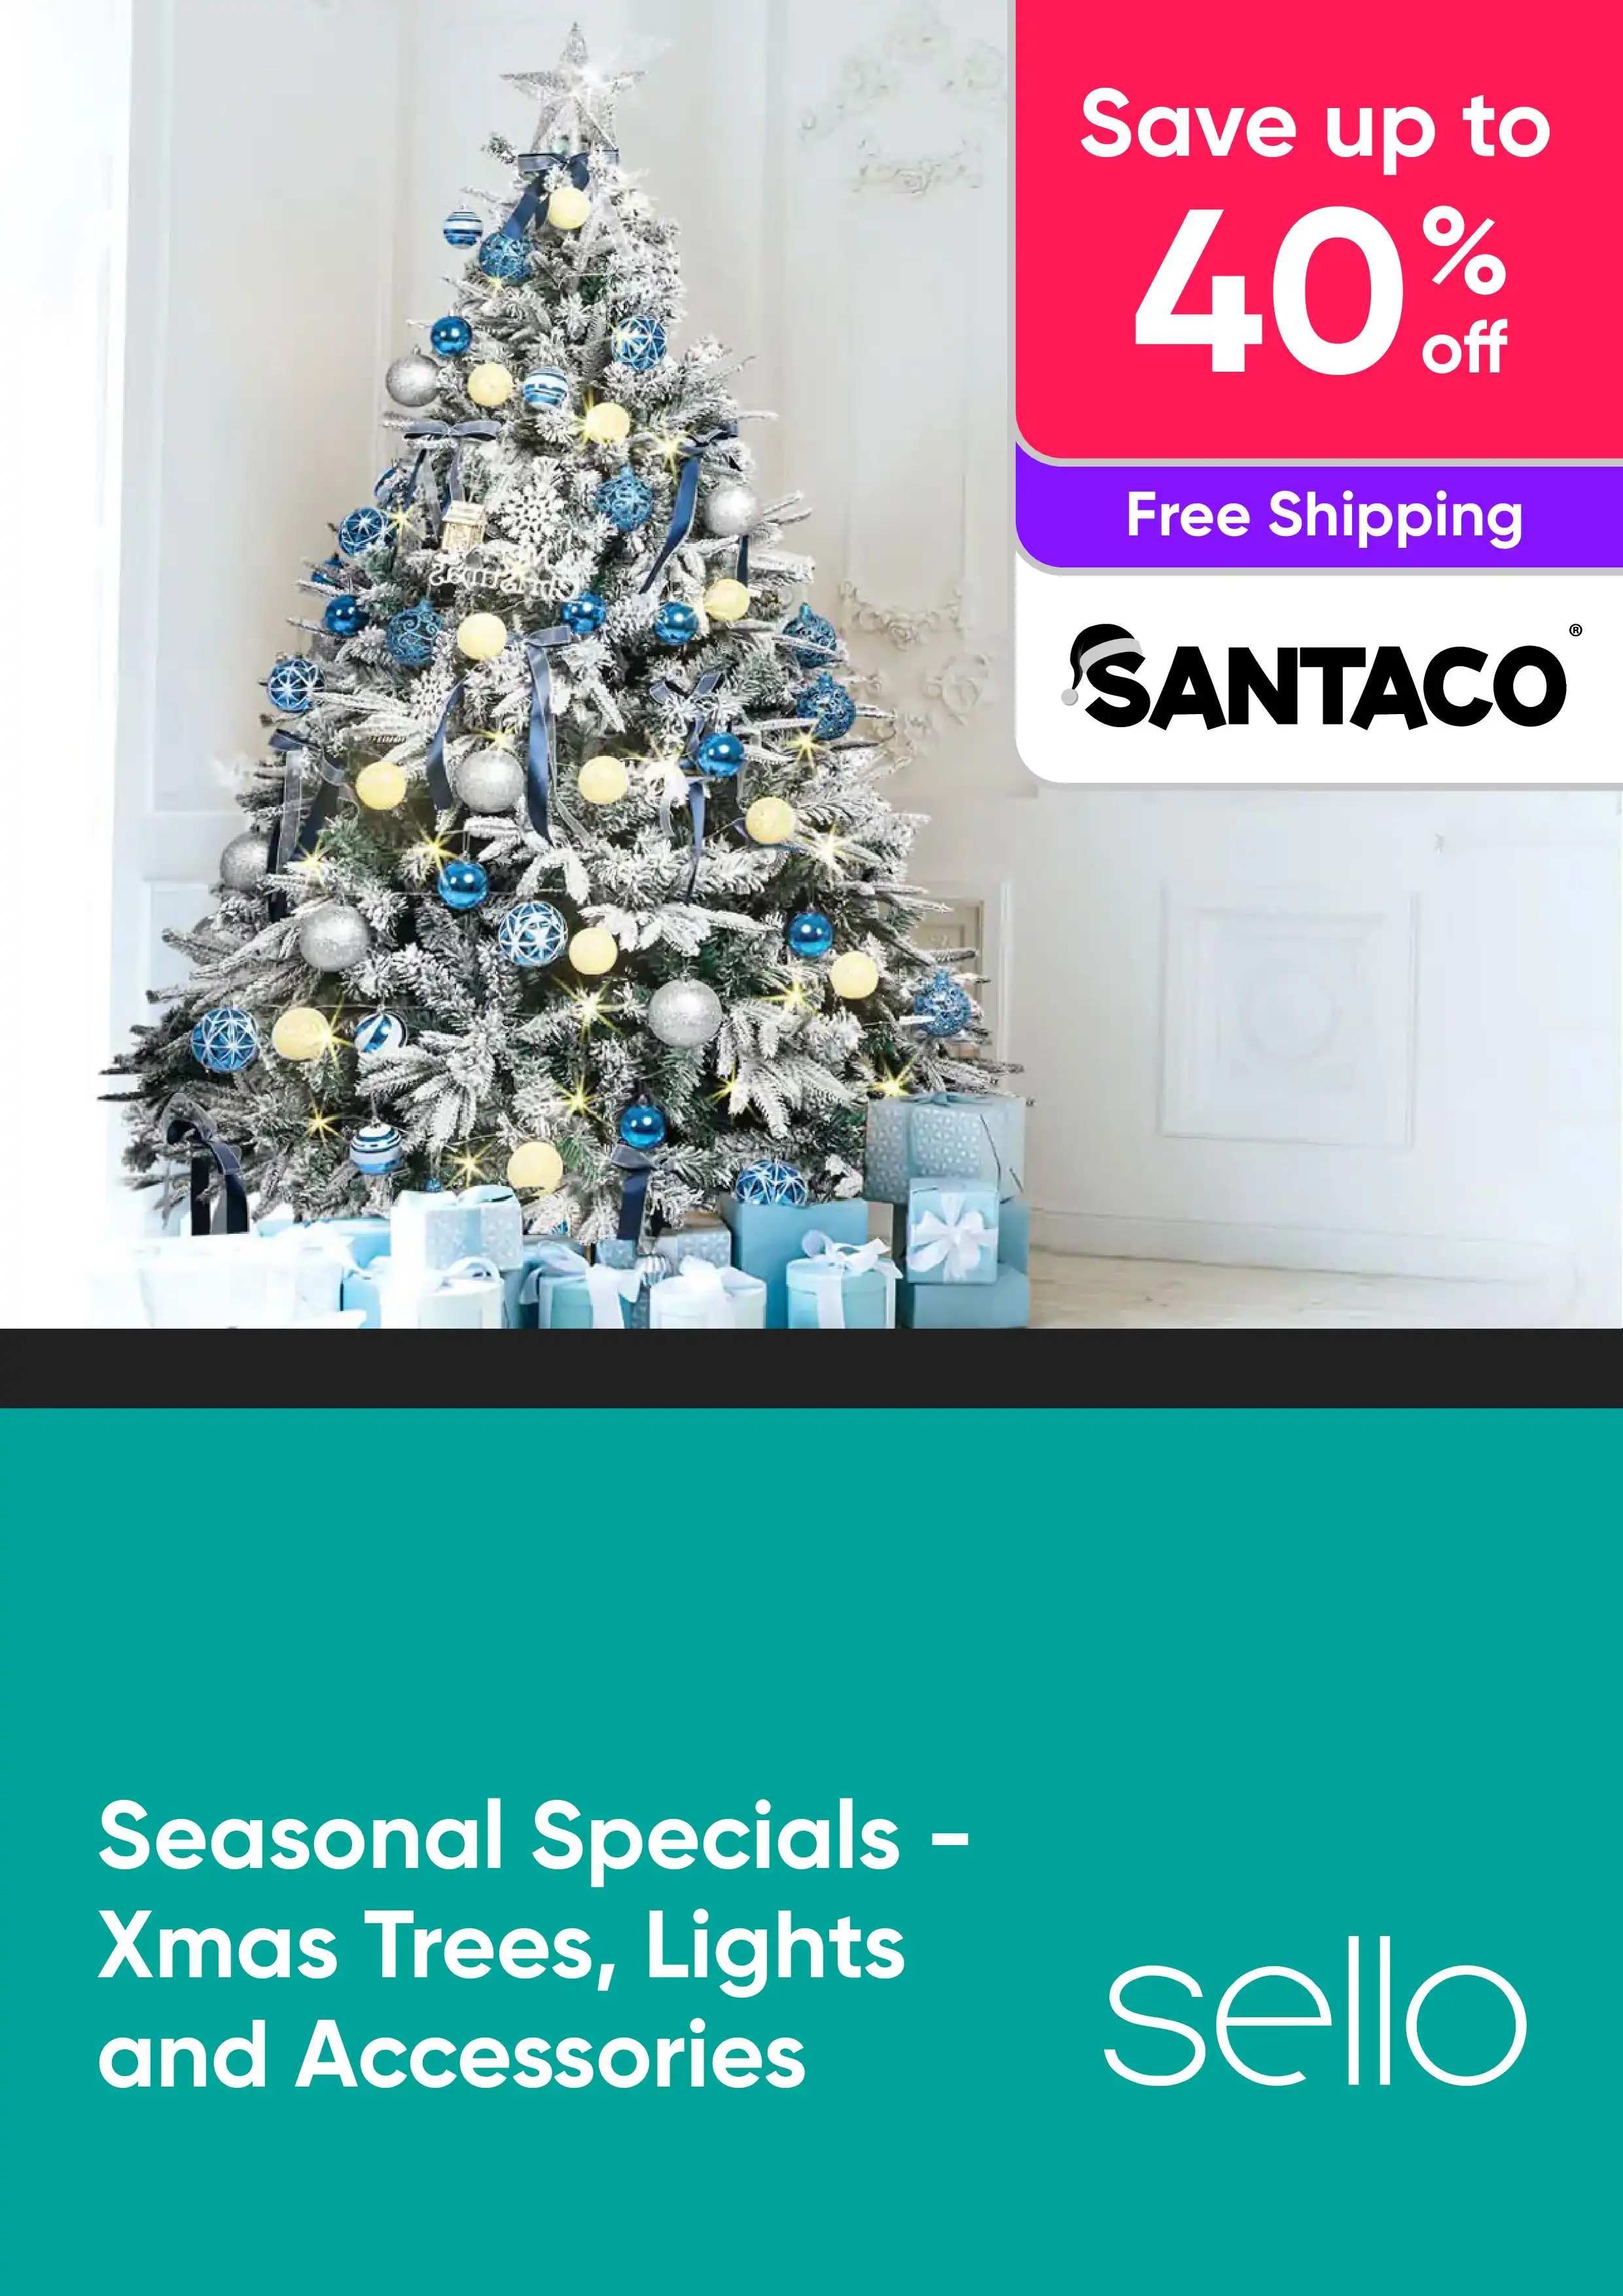 Seasonal Specials - Xmas Trees, Lights and Accessories - Santaco - Up to 40% Off